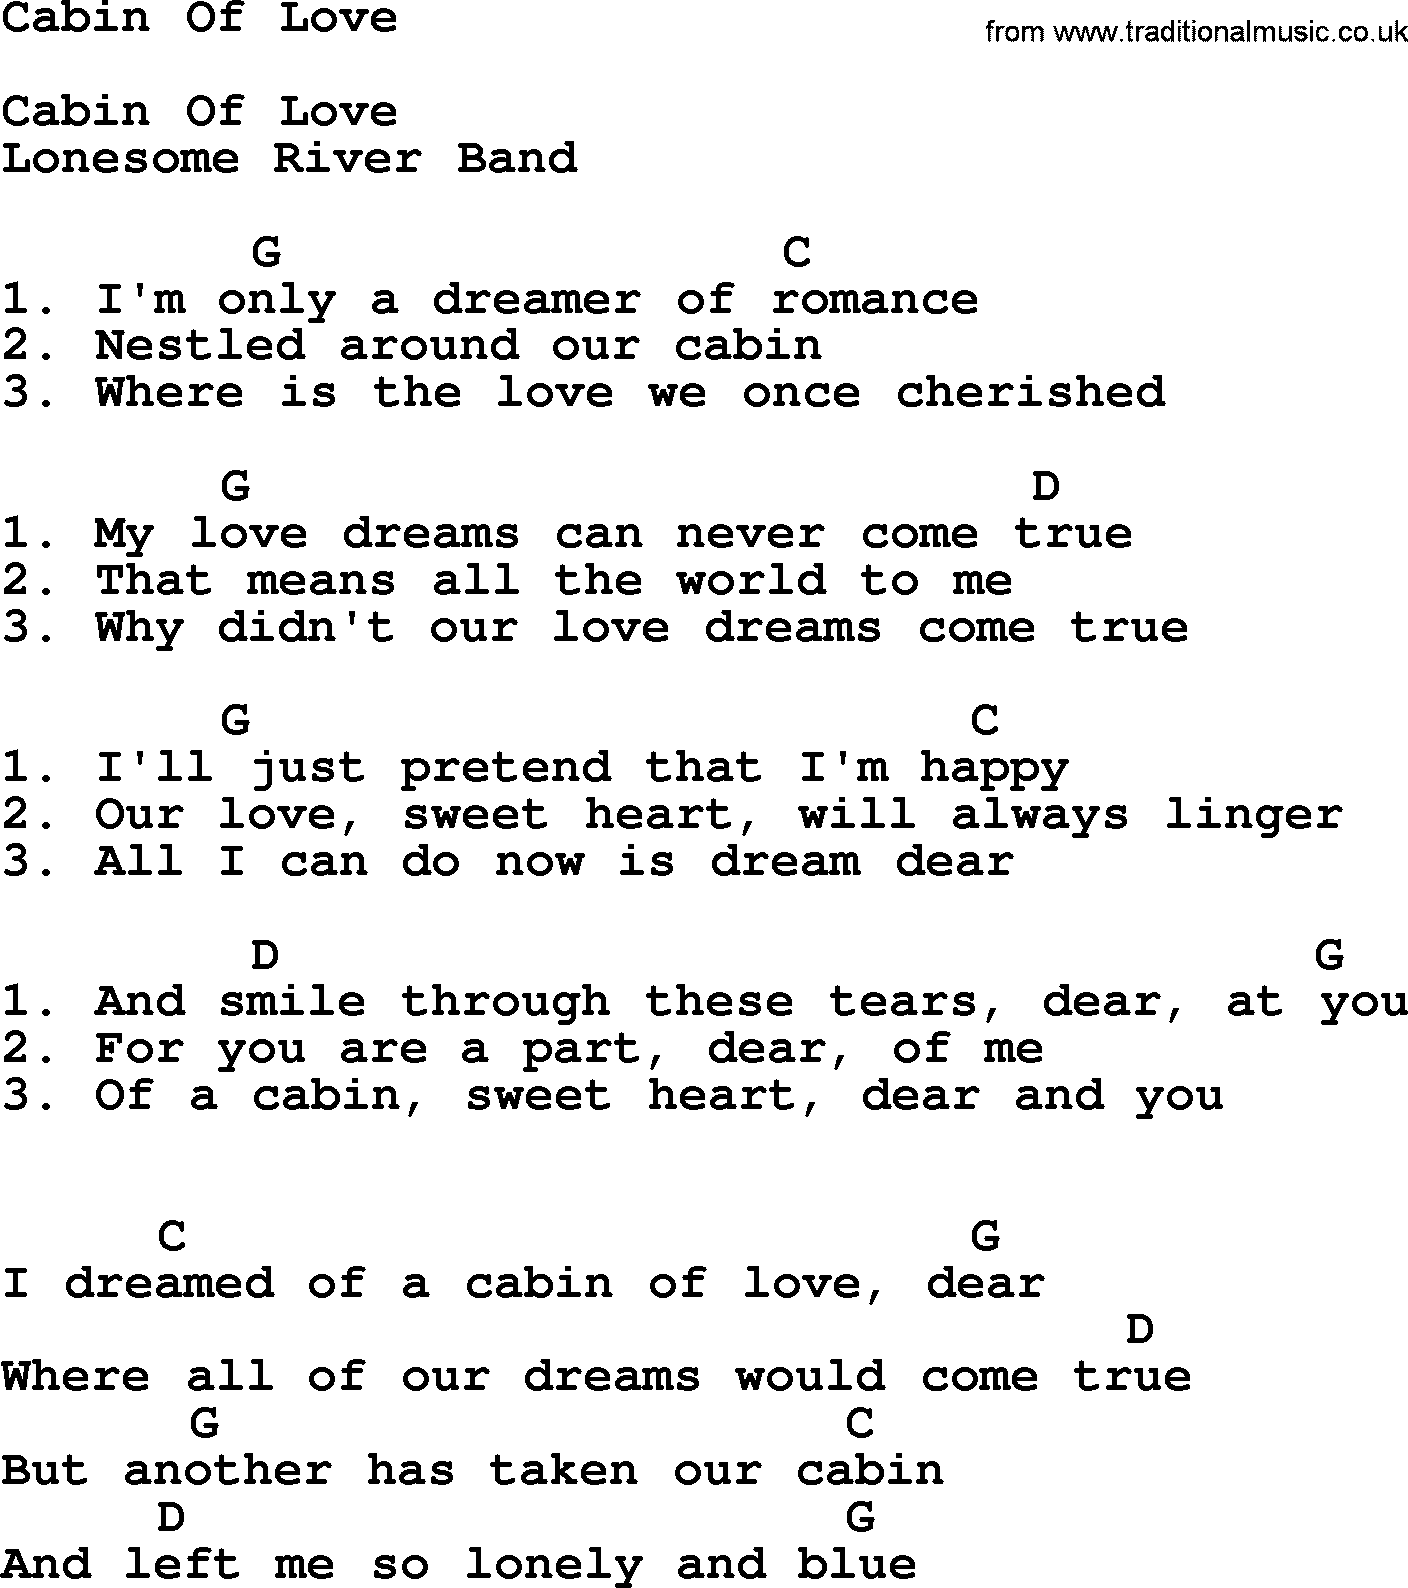 Bluegrass song: Cabin Of Love, lyrics and chords